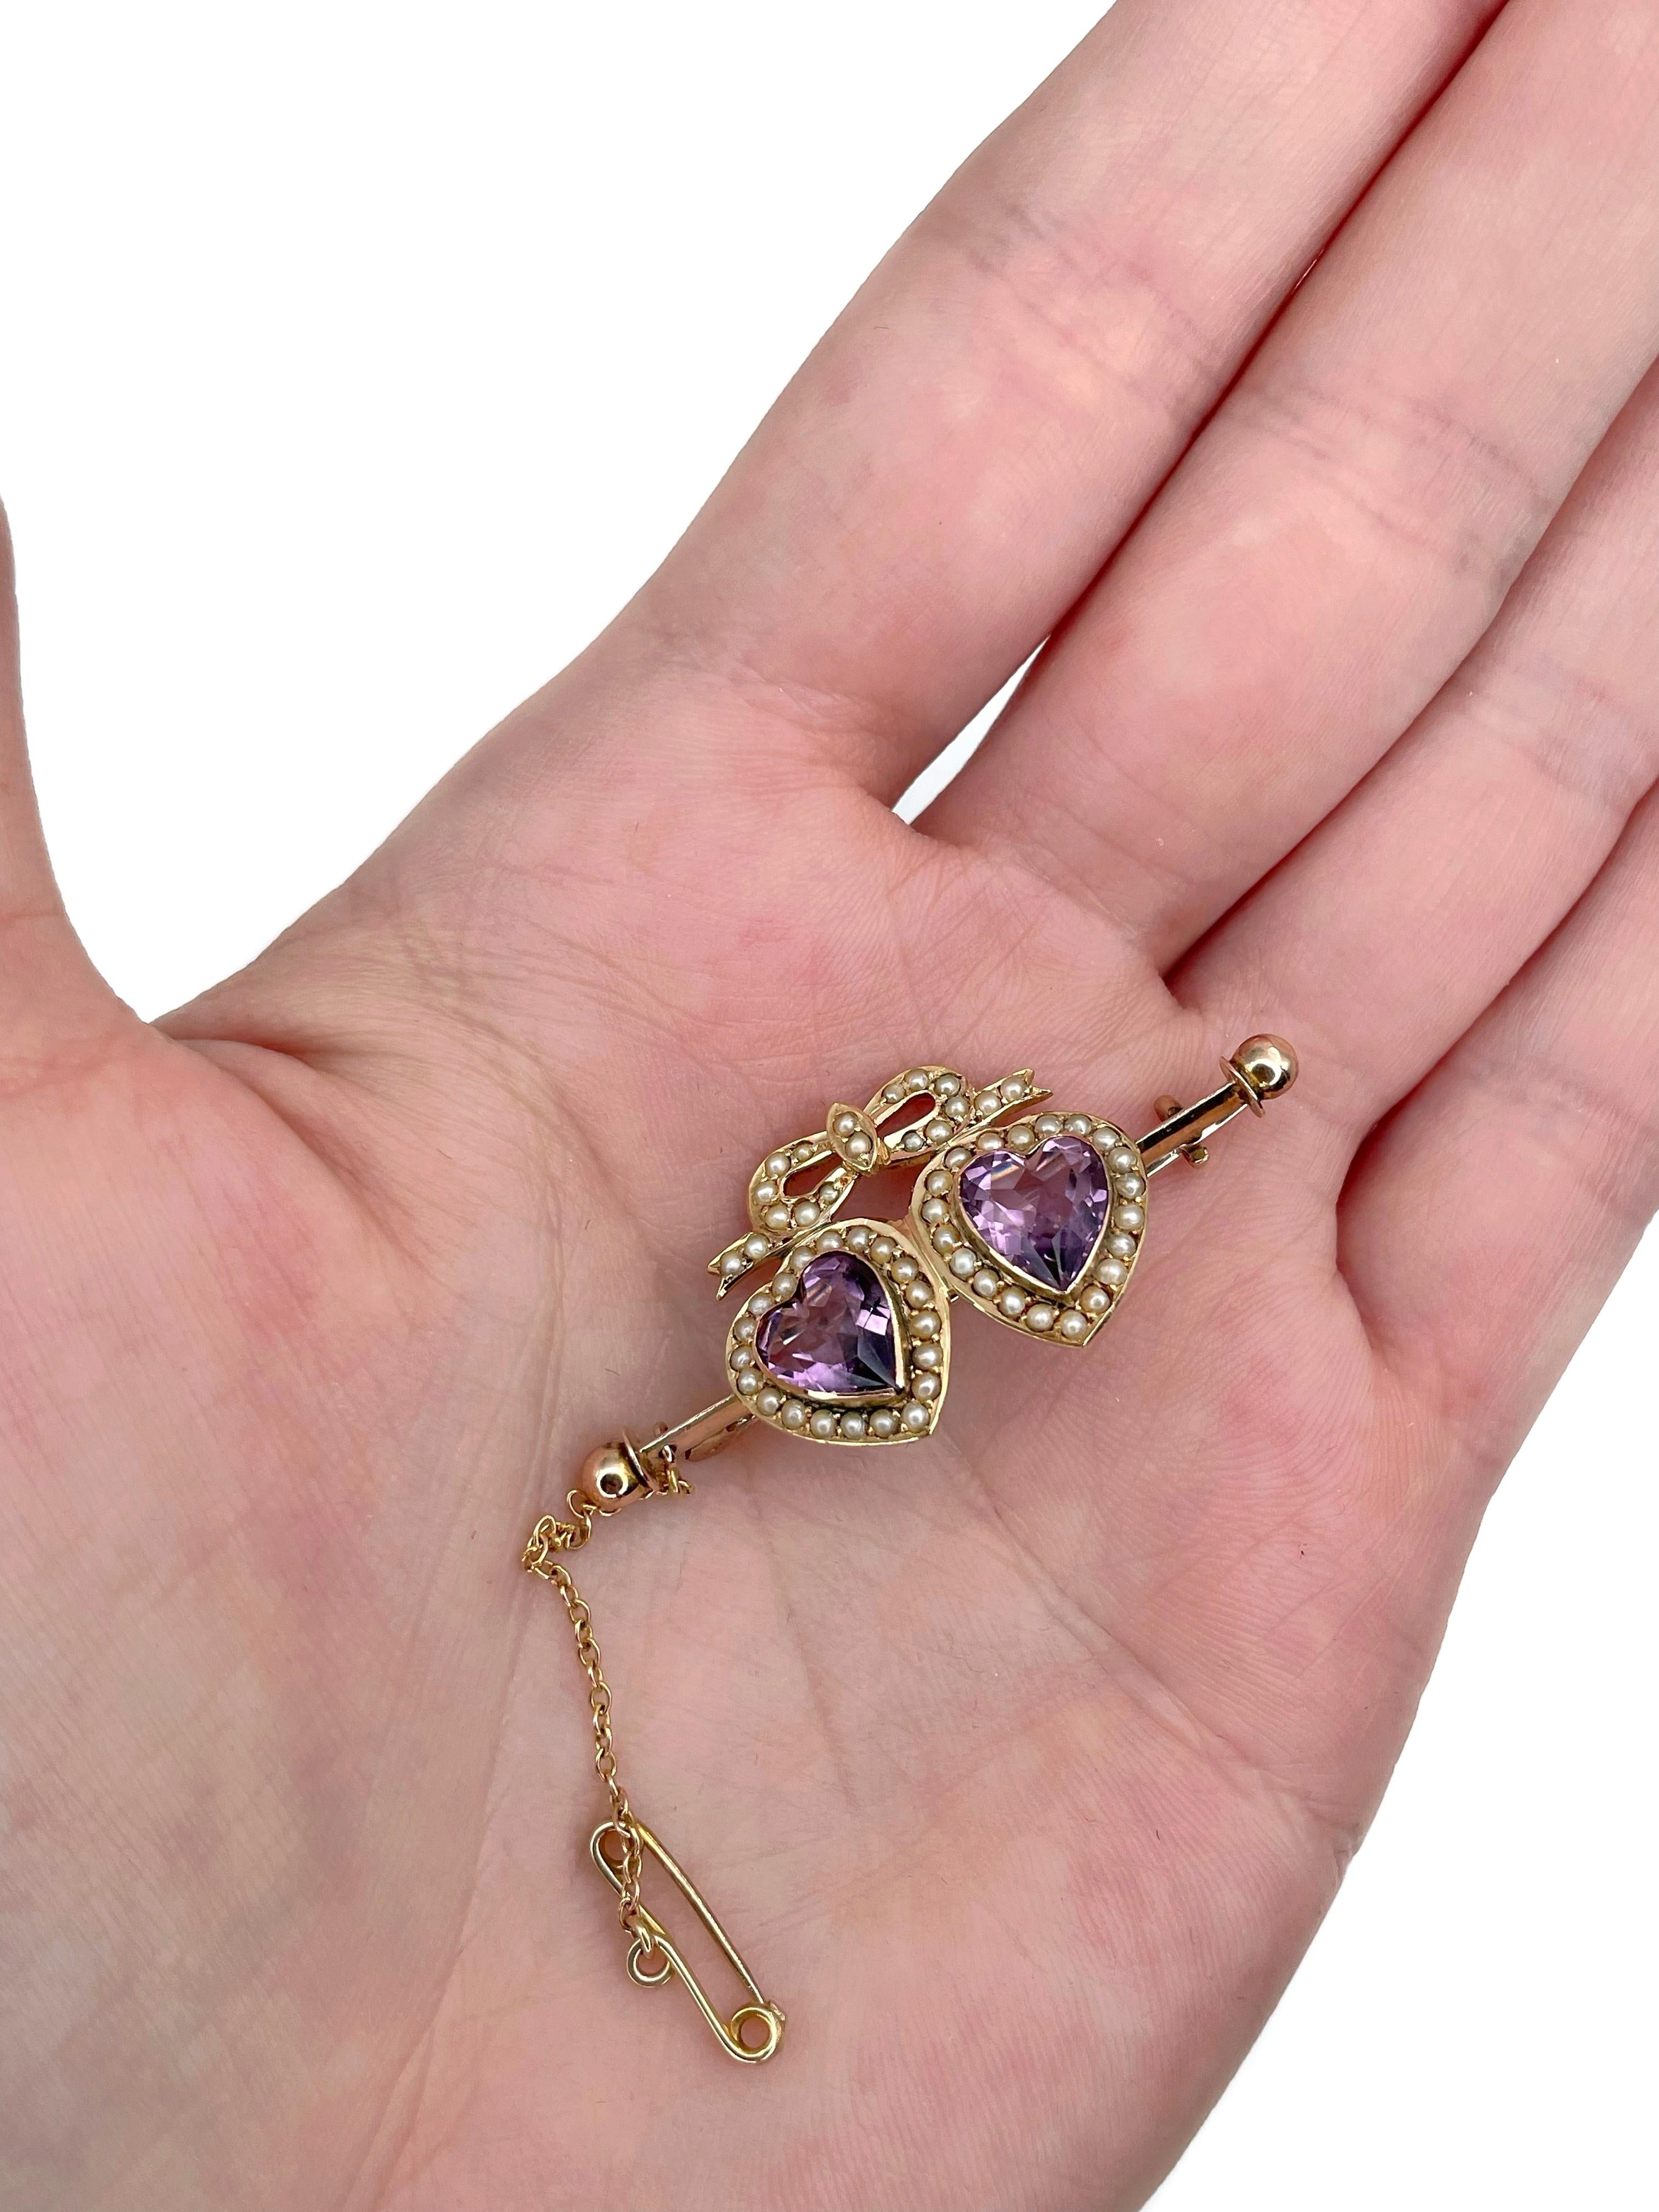 This is a Victorian double heart bar brooch crafted in 9K gold. Circa 1890.

The piece features amethysts and seed pearls. 

Has a C clasp and a safety chain.

Weight: 4.92g
Length: 4.2cm
Width: 1.8cm
Safety chain: 4cm

———

If you have any